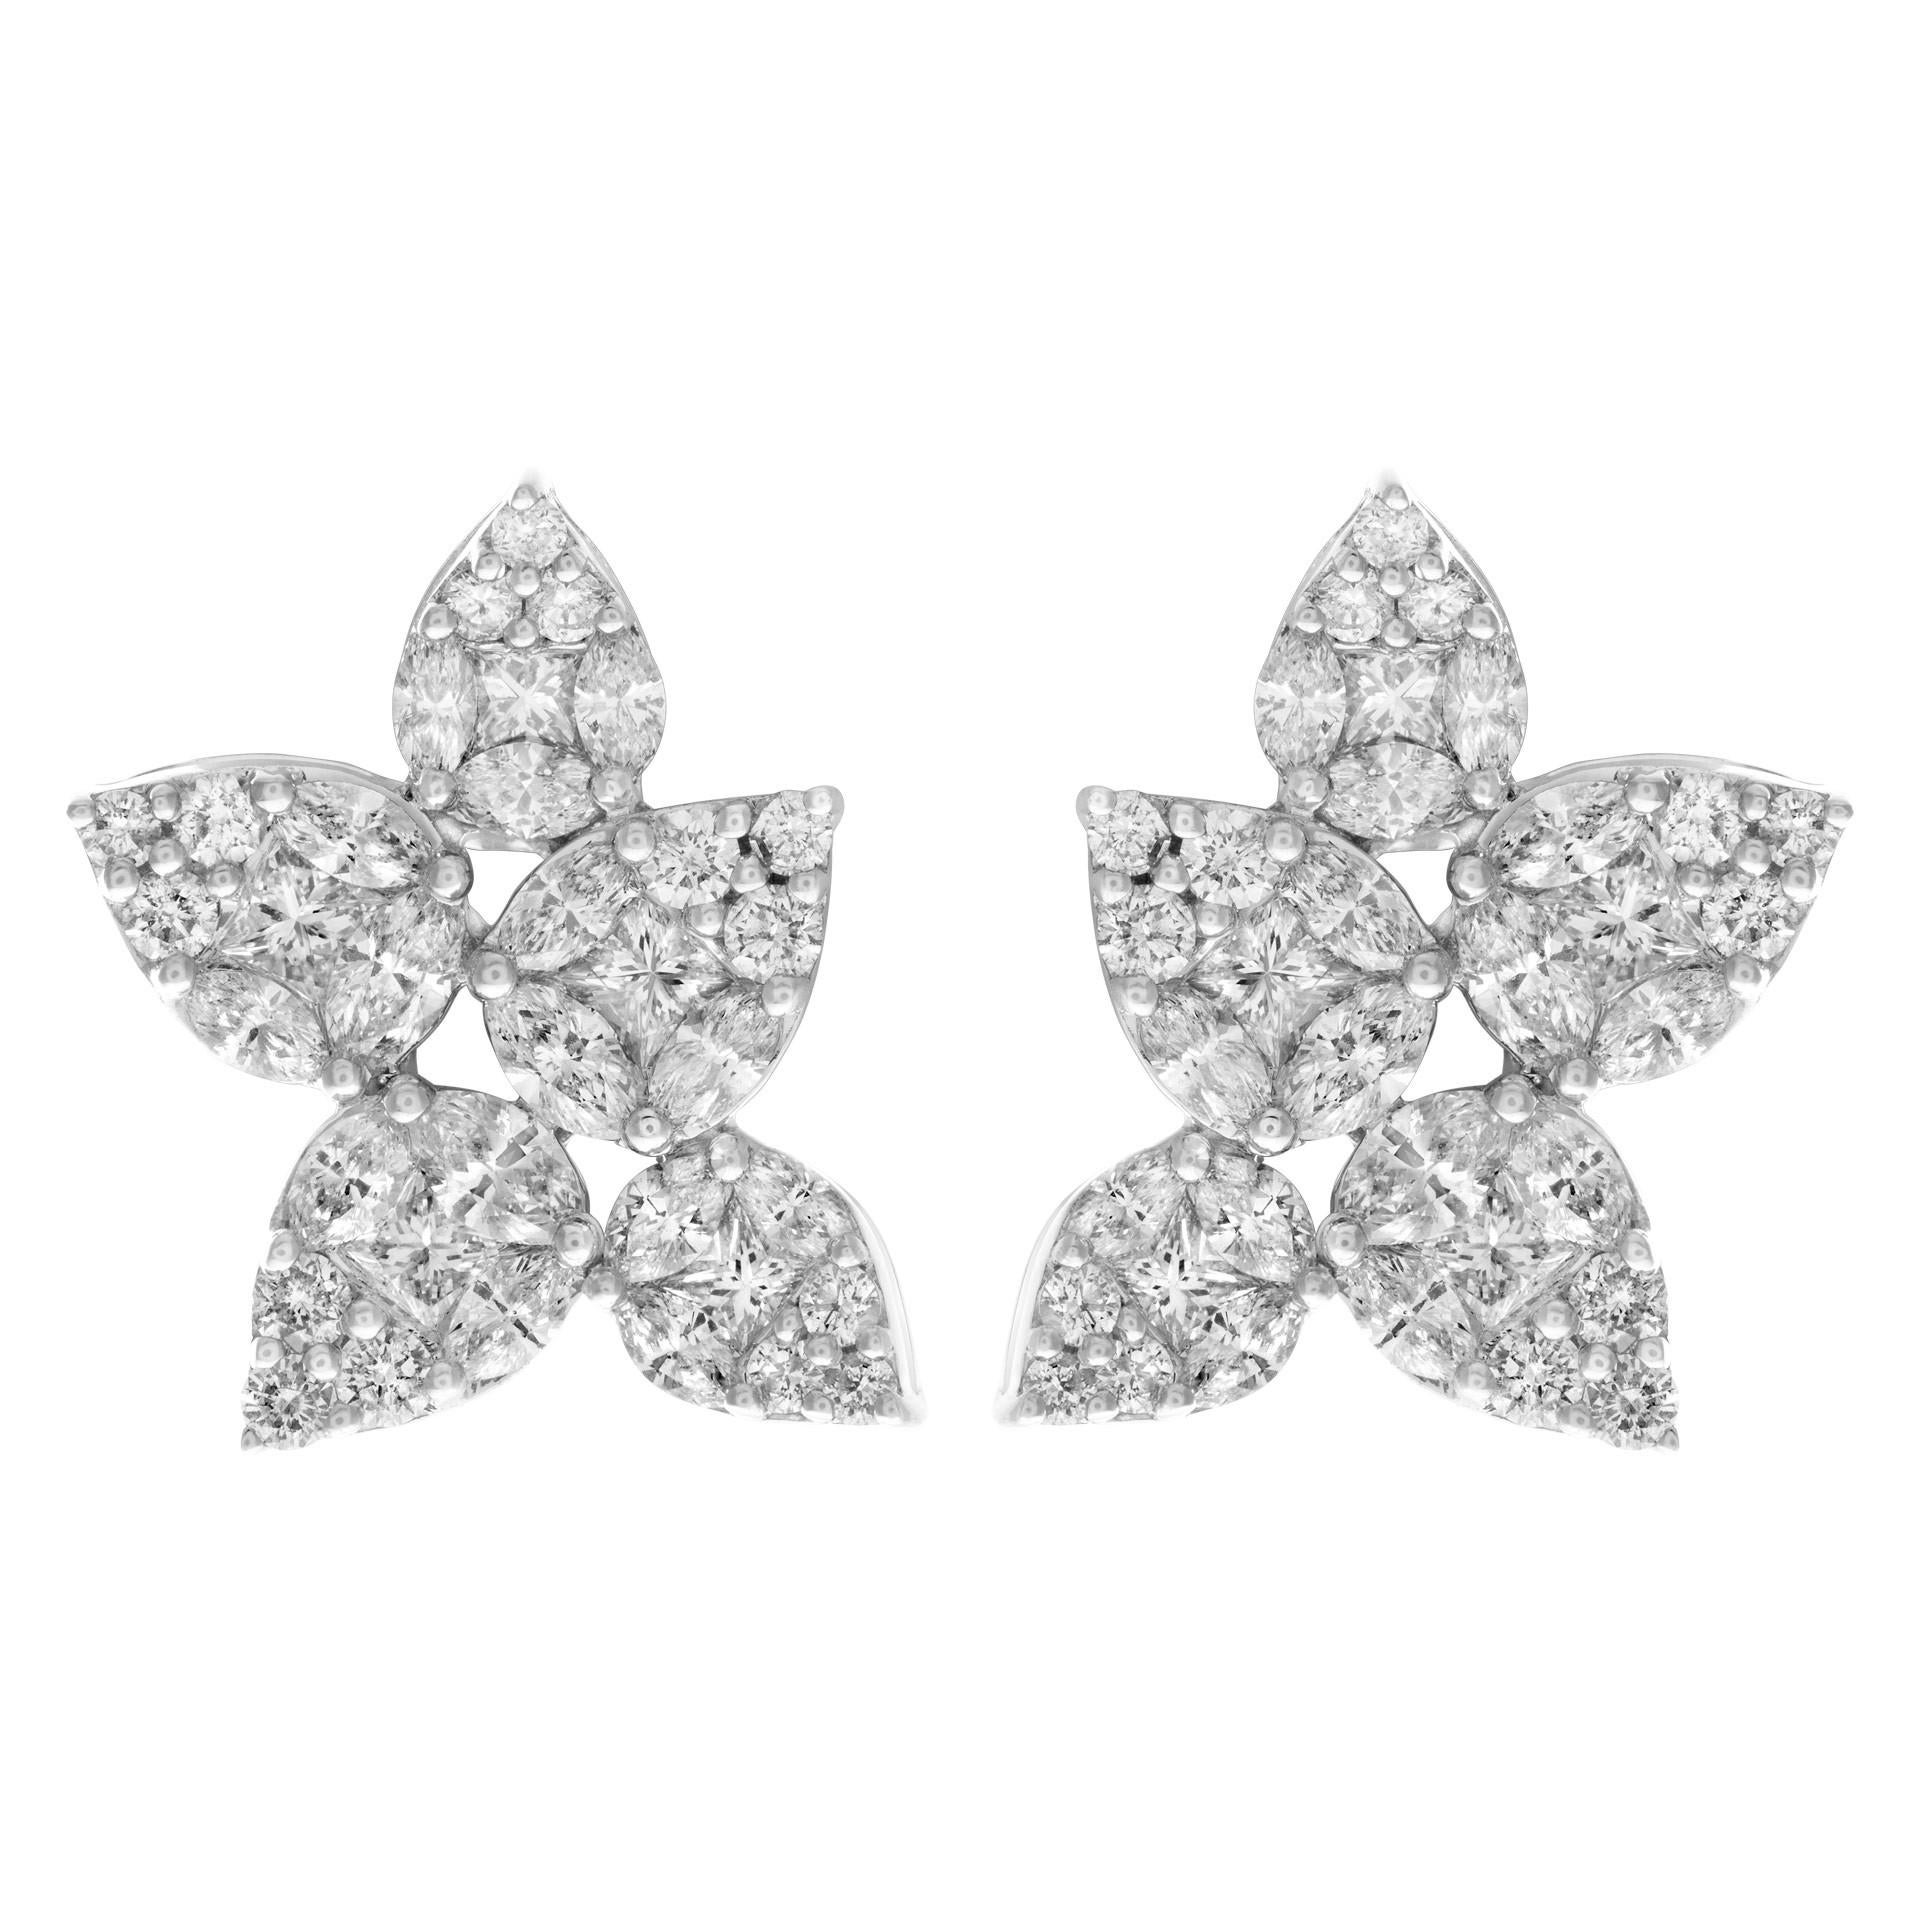 Modern Invisible Set Princess & Round Cut Diamonds Flower Earrings in 18k White Gold